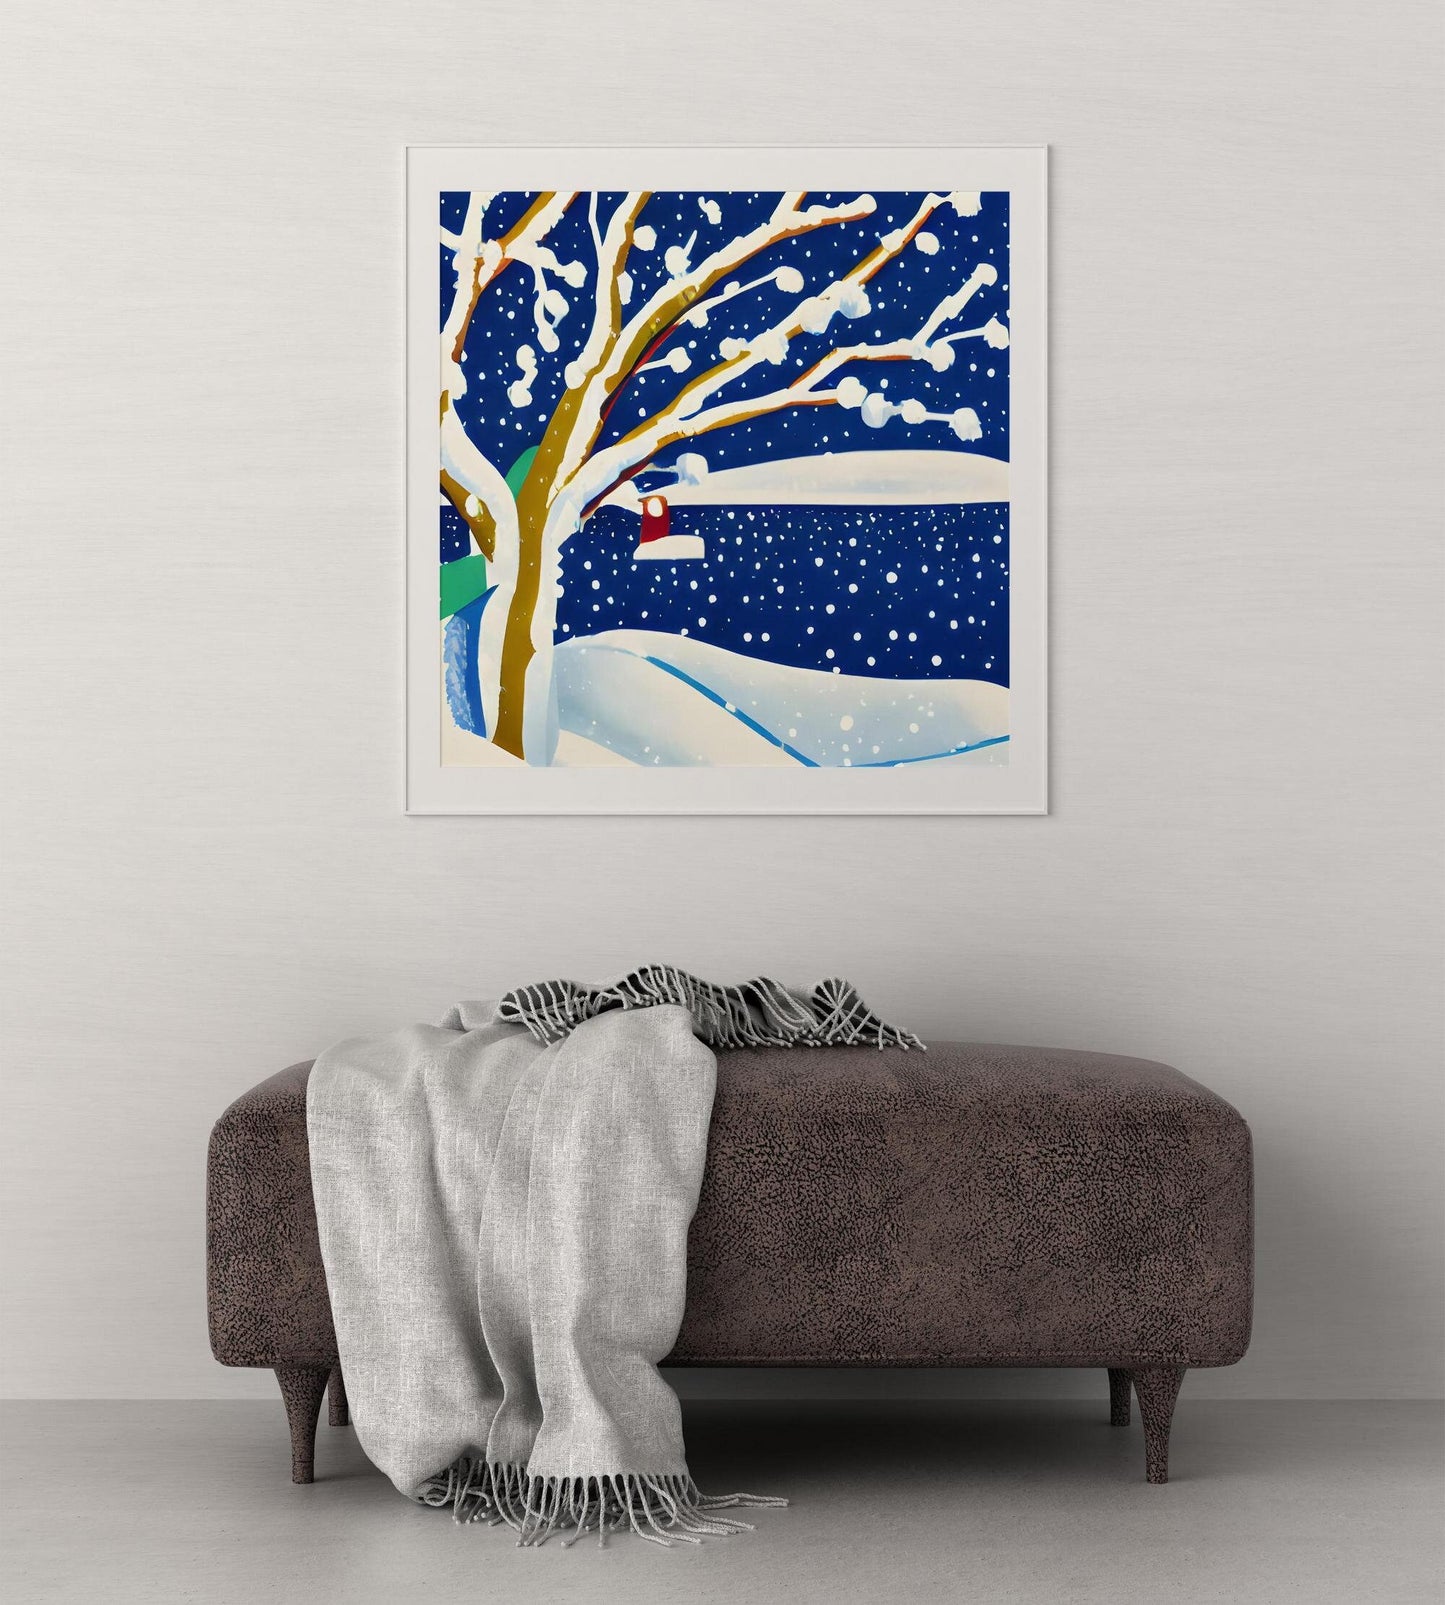 Village On Snowy Christmas Eve Canvas Print, Canvas Print, Abstract Print, Minimalist Prints, Home Decor, Framed Canvas, Watercolor Print